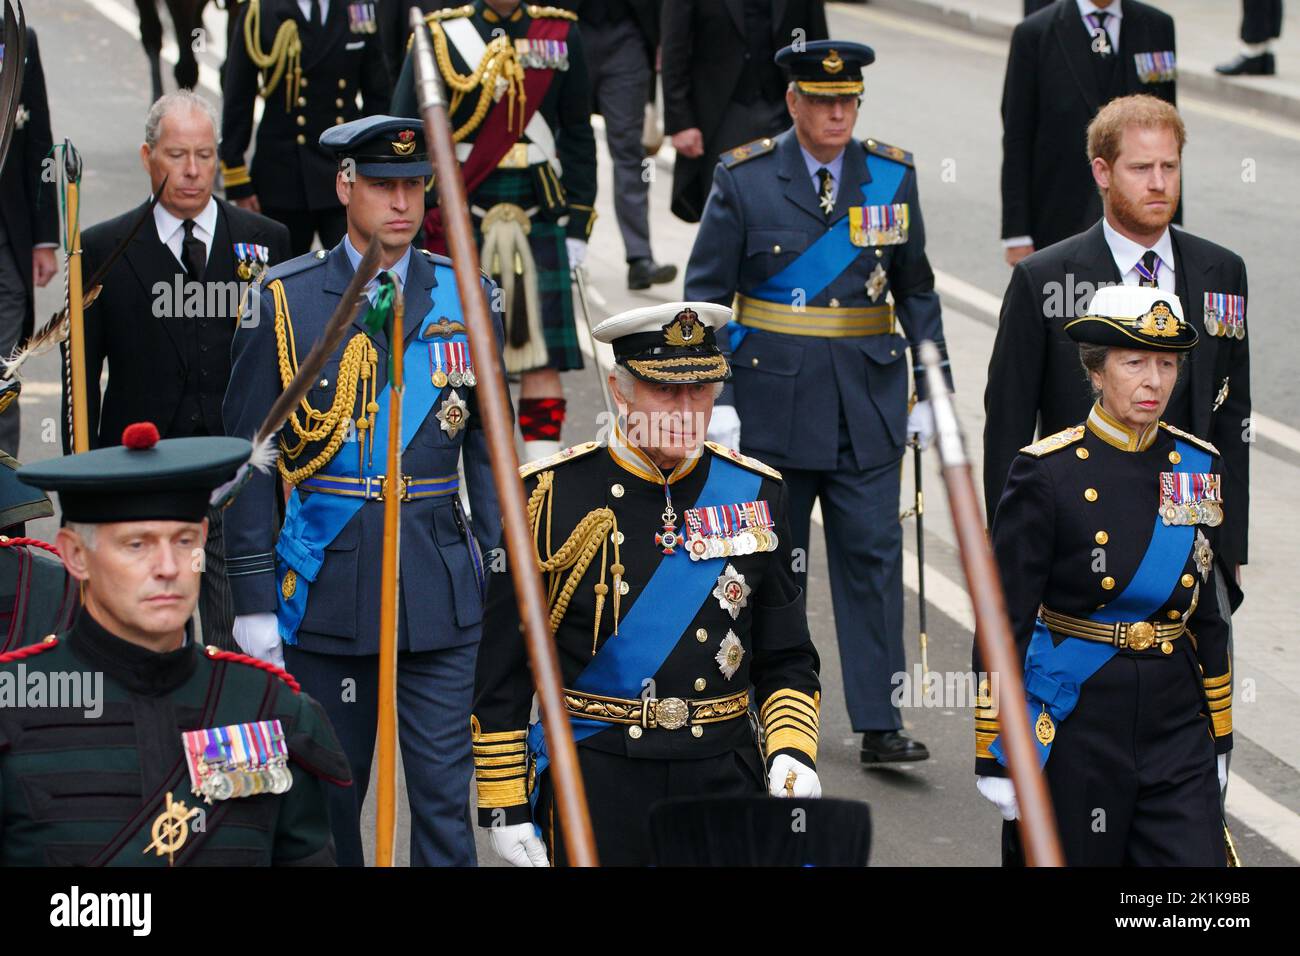 (left to right) The Prince of Wales, King Charles III, the Princess Royal and the Duke of Sussex following the State Gun Carriage carries the coffin of Queen Elizabeth II, draped in the Royal Standard with the Imperial State Crown and the Sovereign's orb and sceptre, in the Ceremonial Procession during her State Funeral at Westminster Abbey, London. Picture date: Monday September 19, 2022. Stock Photo